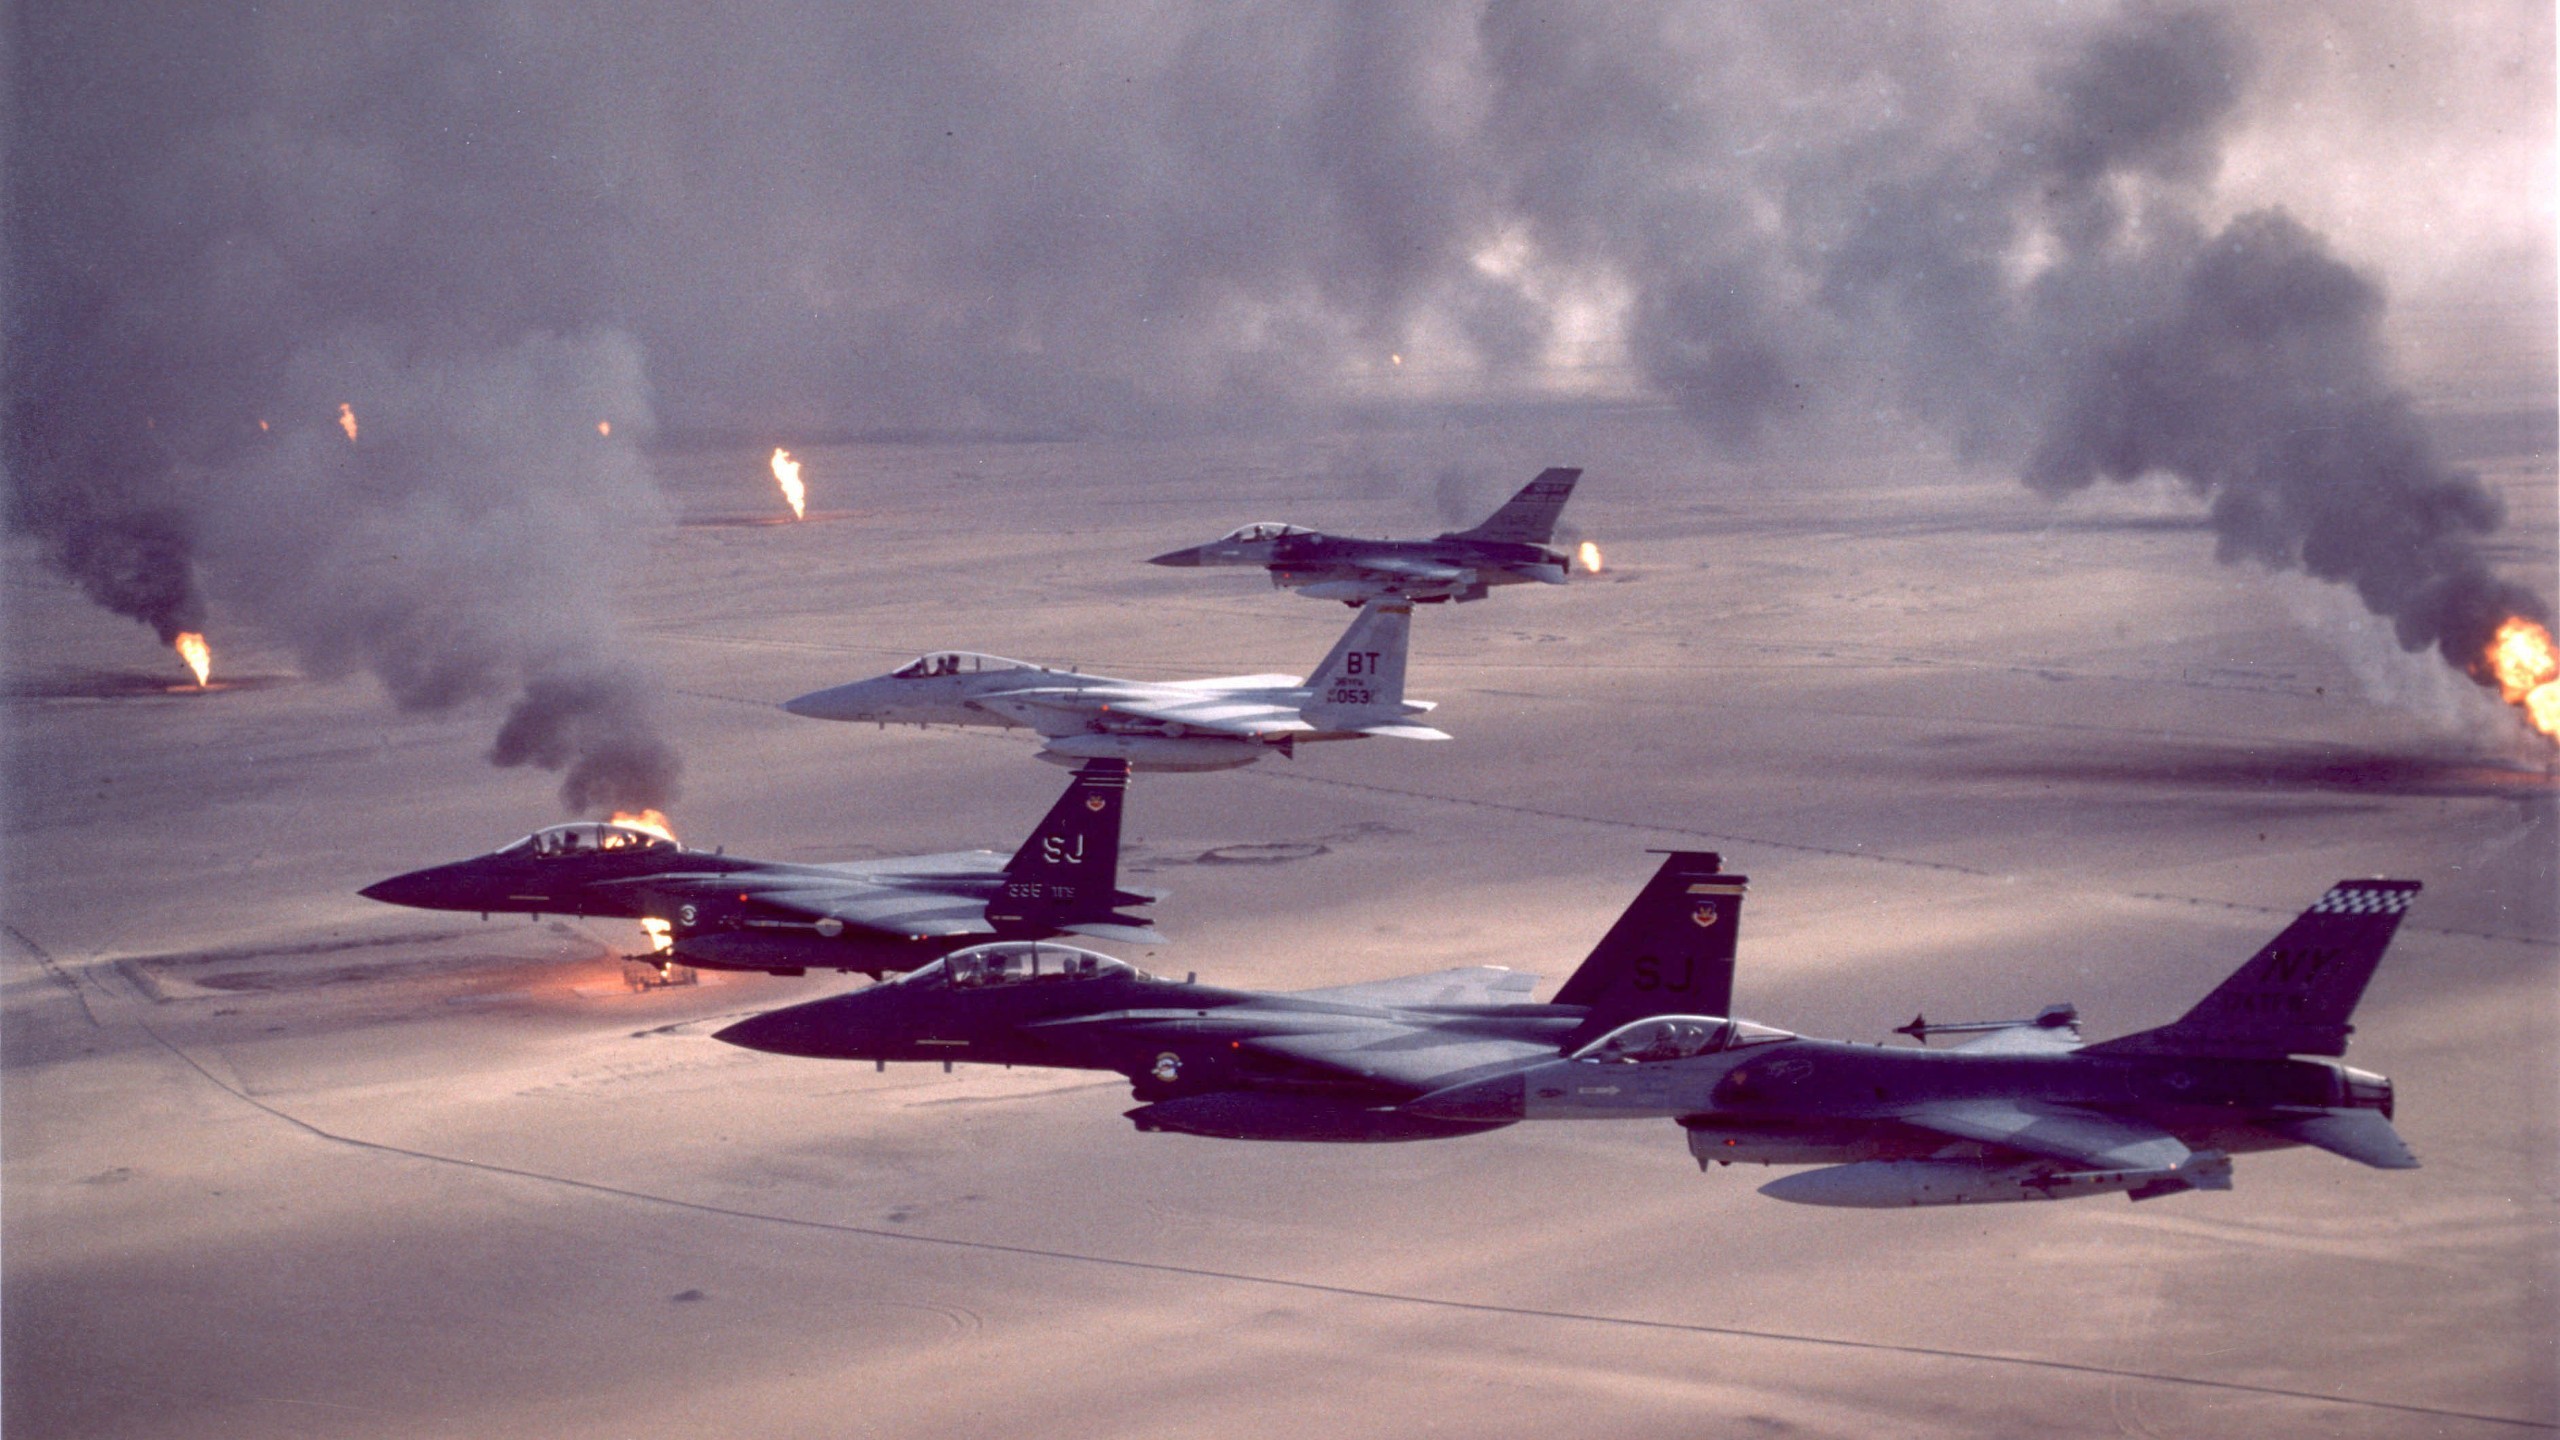 military military aircraft jet fighter operation desert storm kuwait gulf war us air force f 15 strike eagle general dynamics f 16 fighting falcon wallpaper